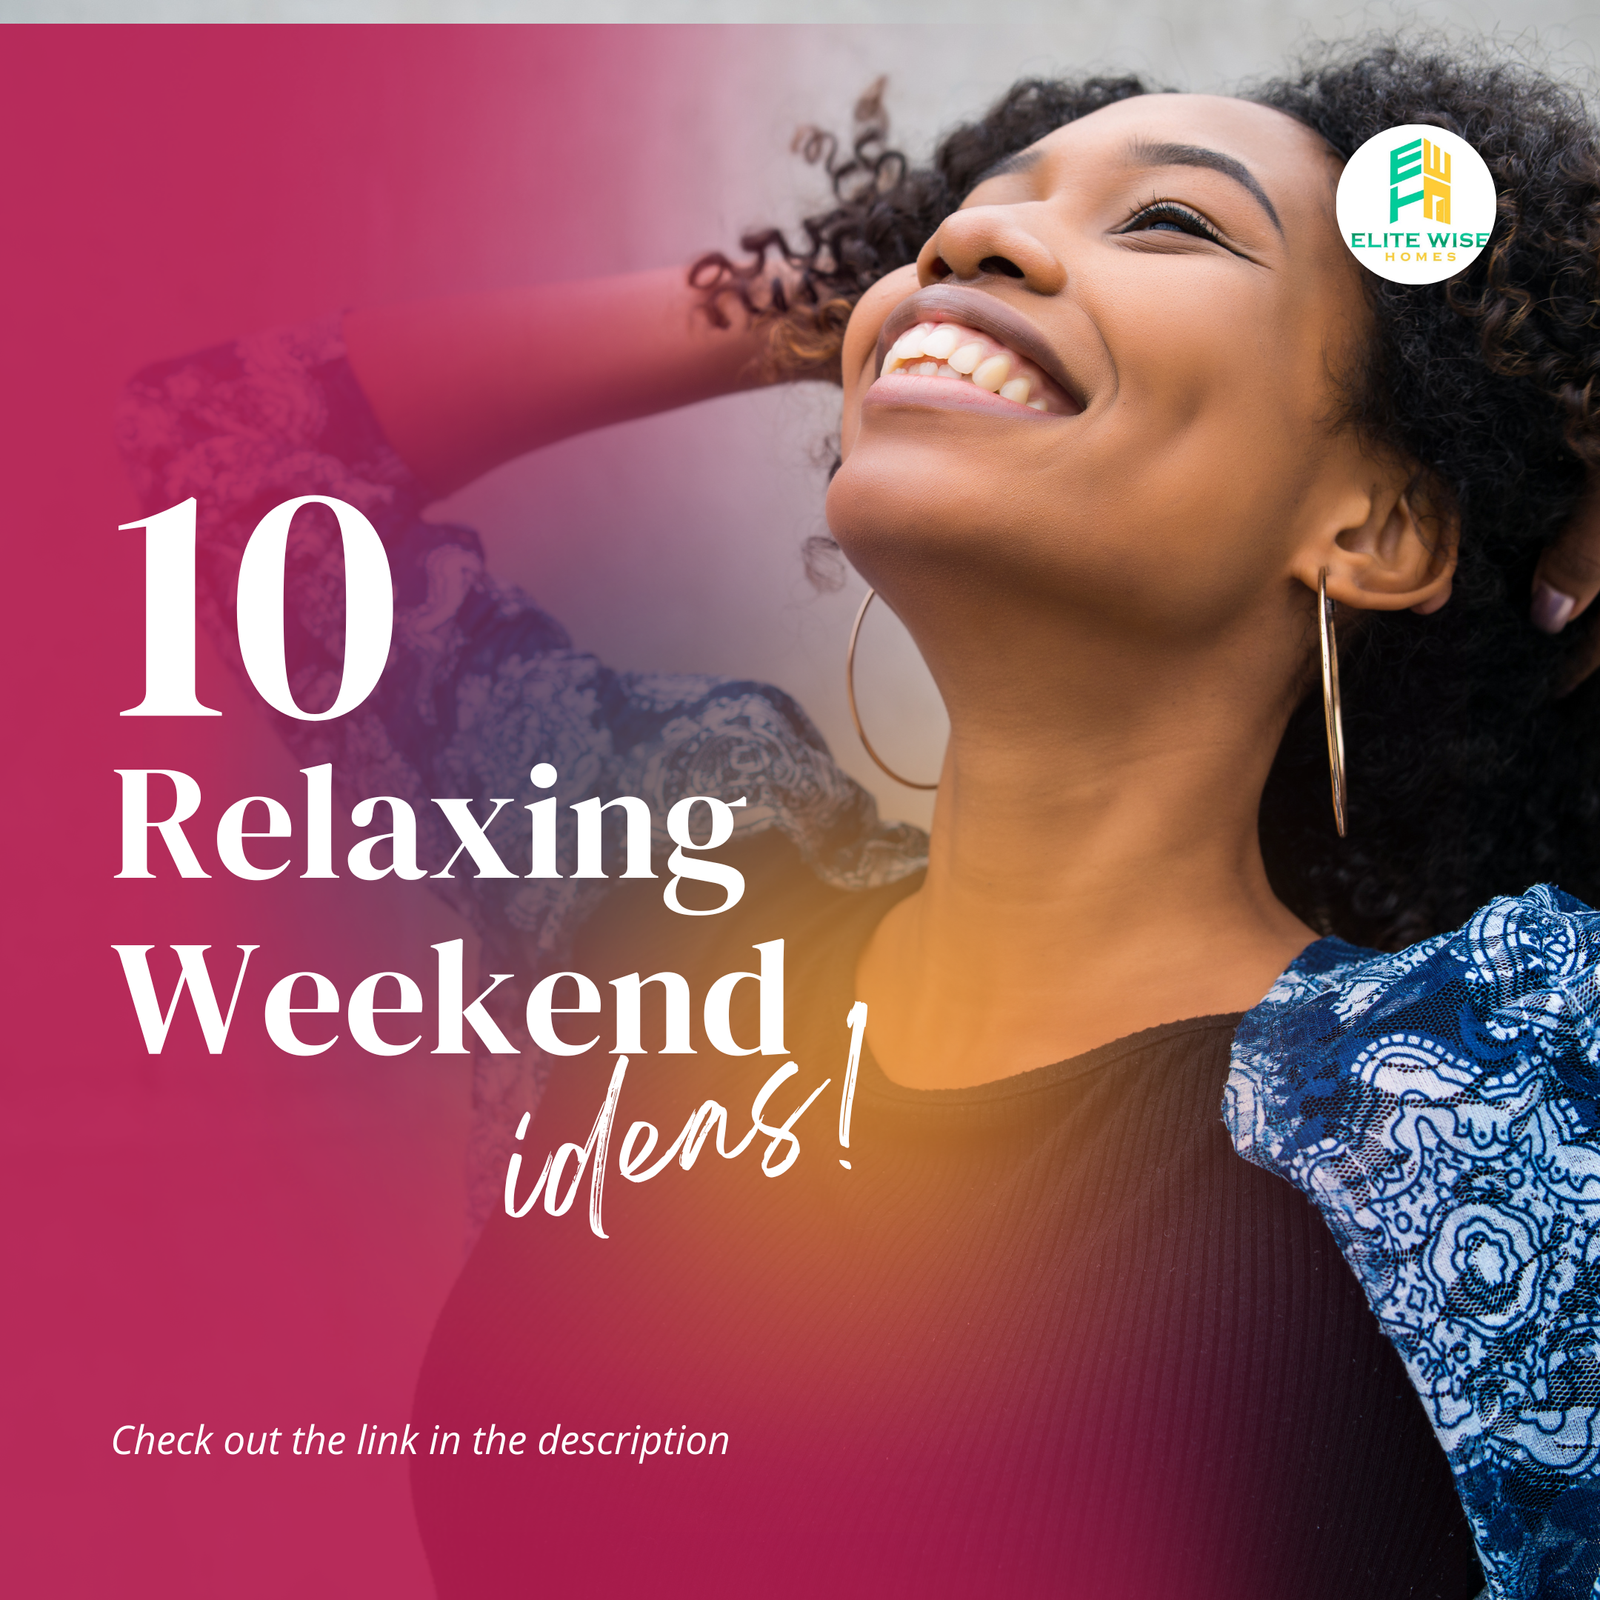 tips for weekend relaxation